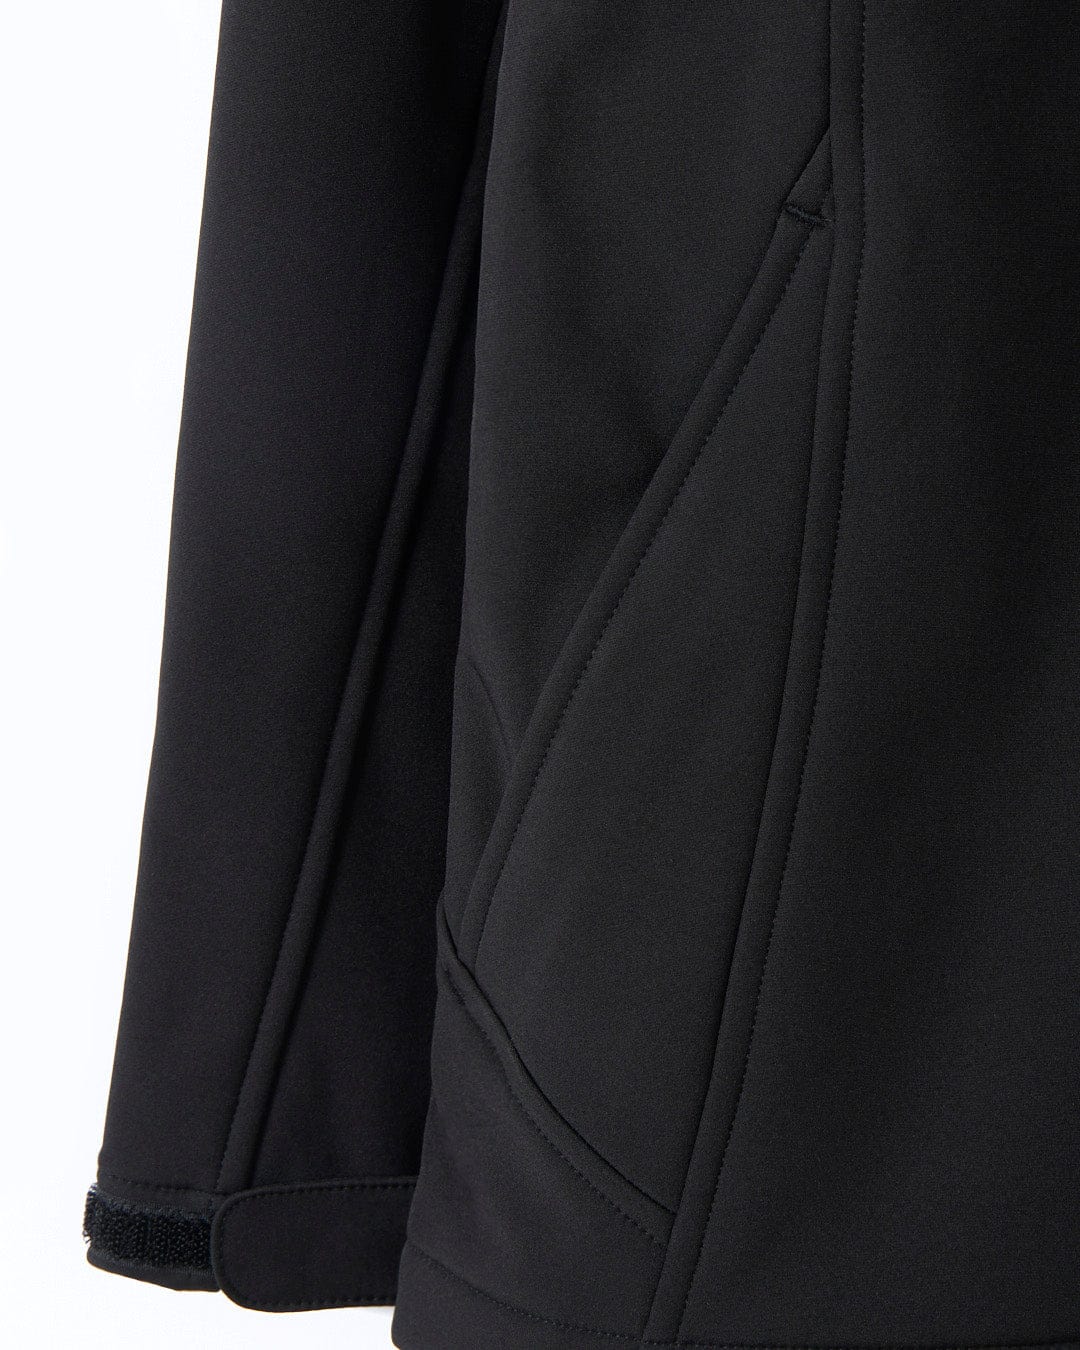 The back of a Solar - Womens Softshell Jacket - Black - SS24 with a zippered pocket, Saltrock.